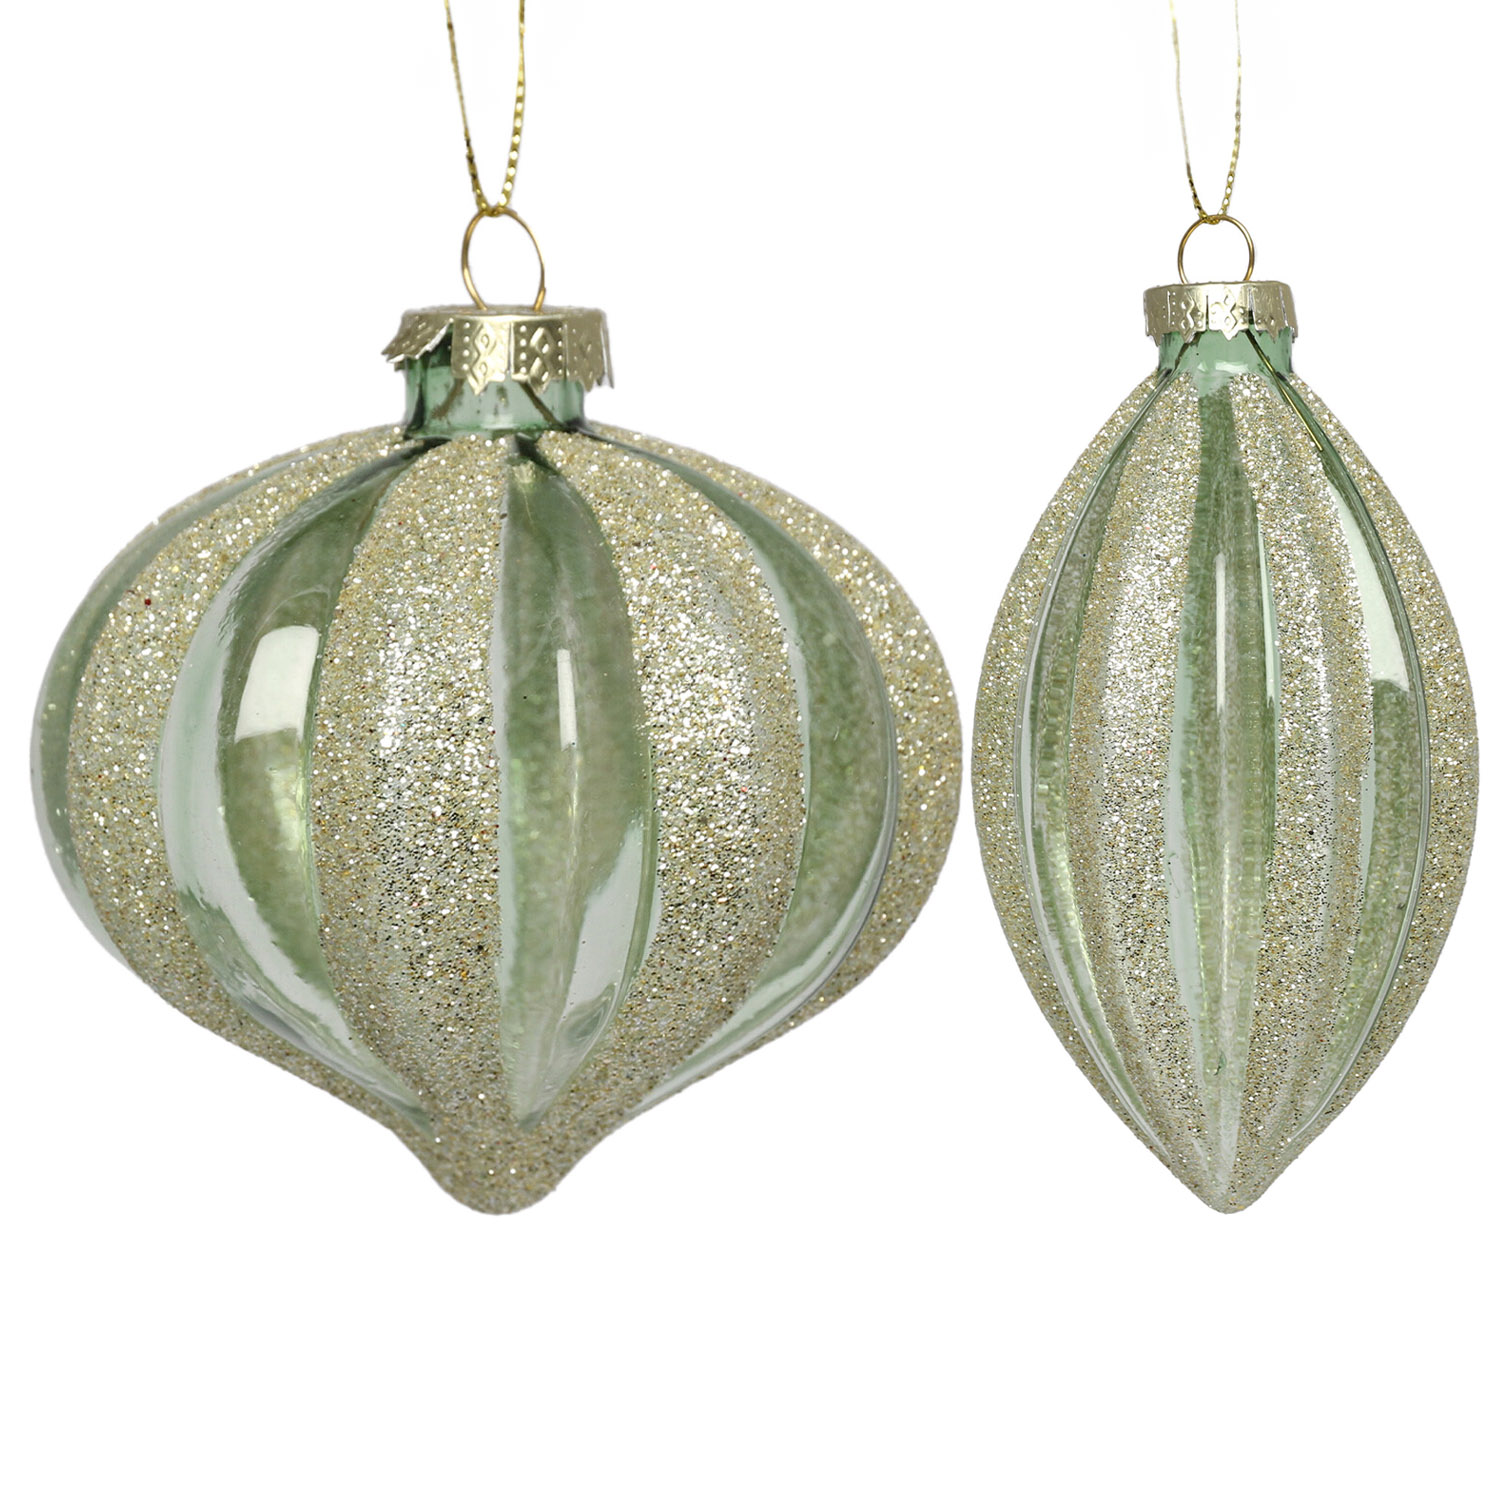 Royal Emerald Clear and Champagne Glitter Bauble Single Ornament in Assorted Style Image 1